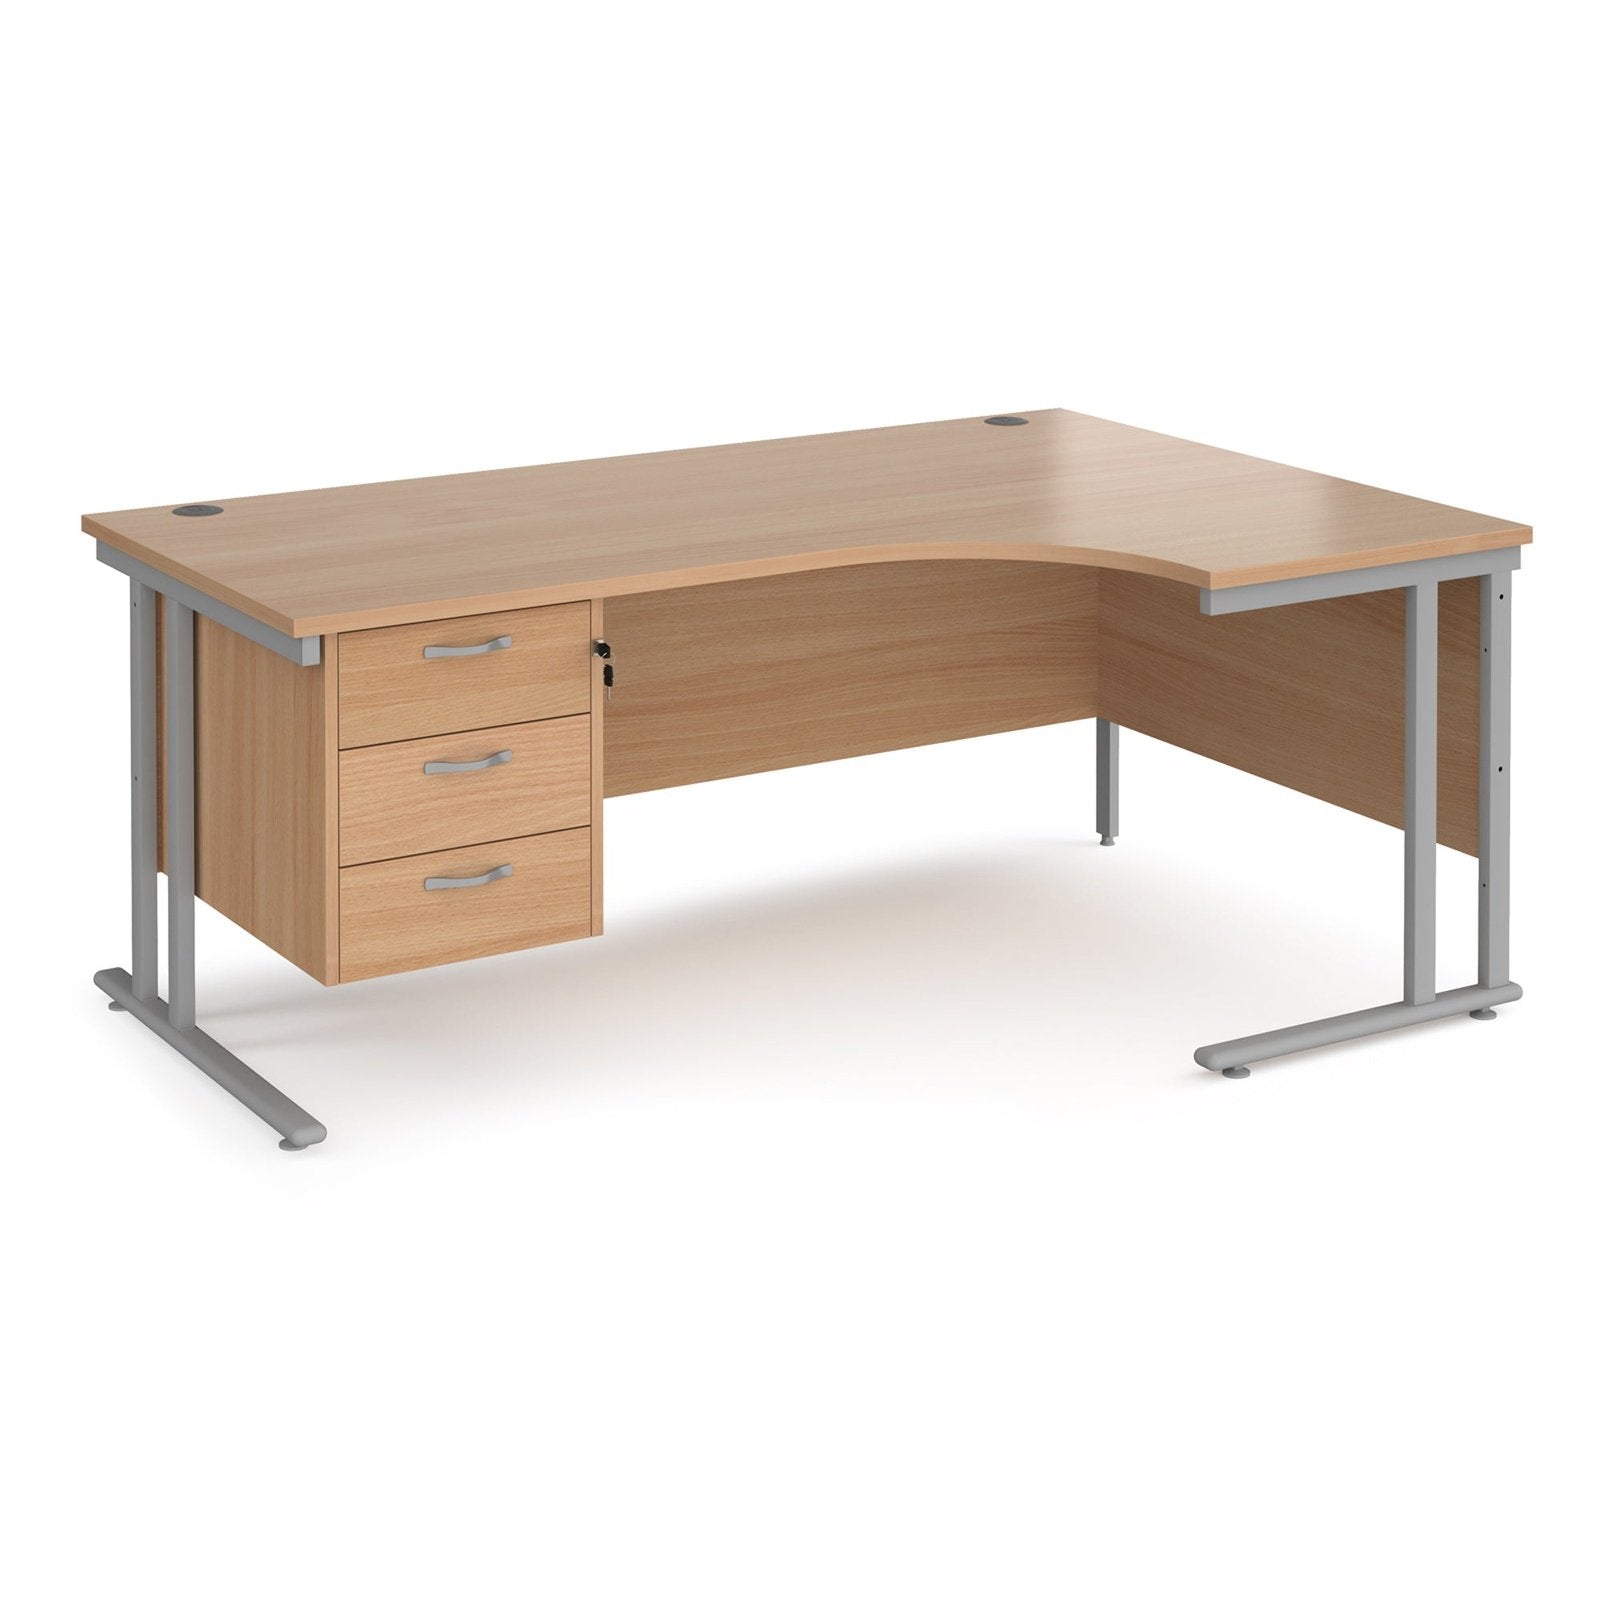 Maestro 25 cantilever leg right hand ergonomic desk with 3 drawer pedestal - Office Products Online